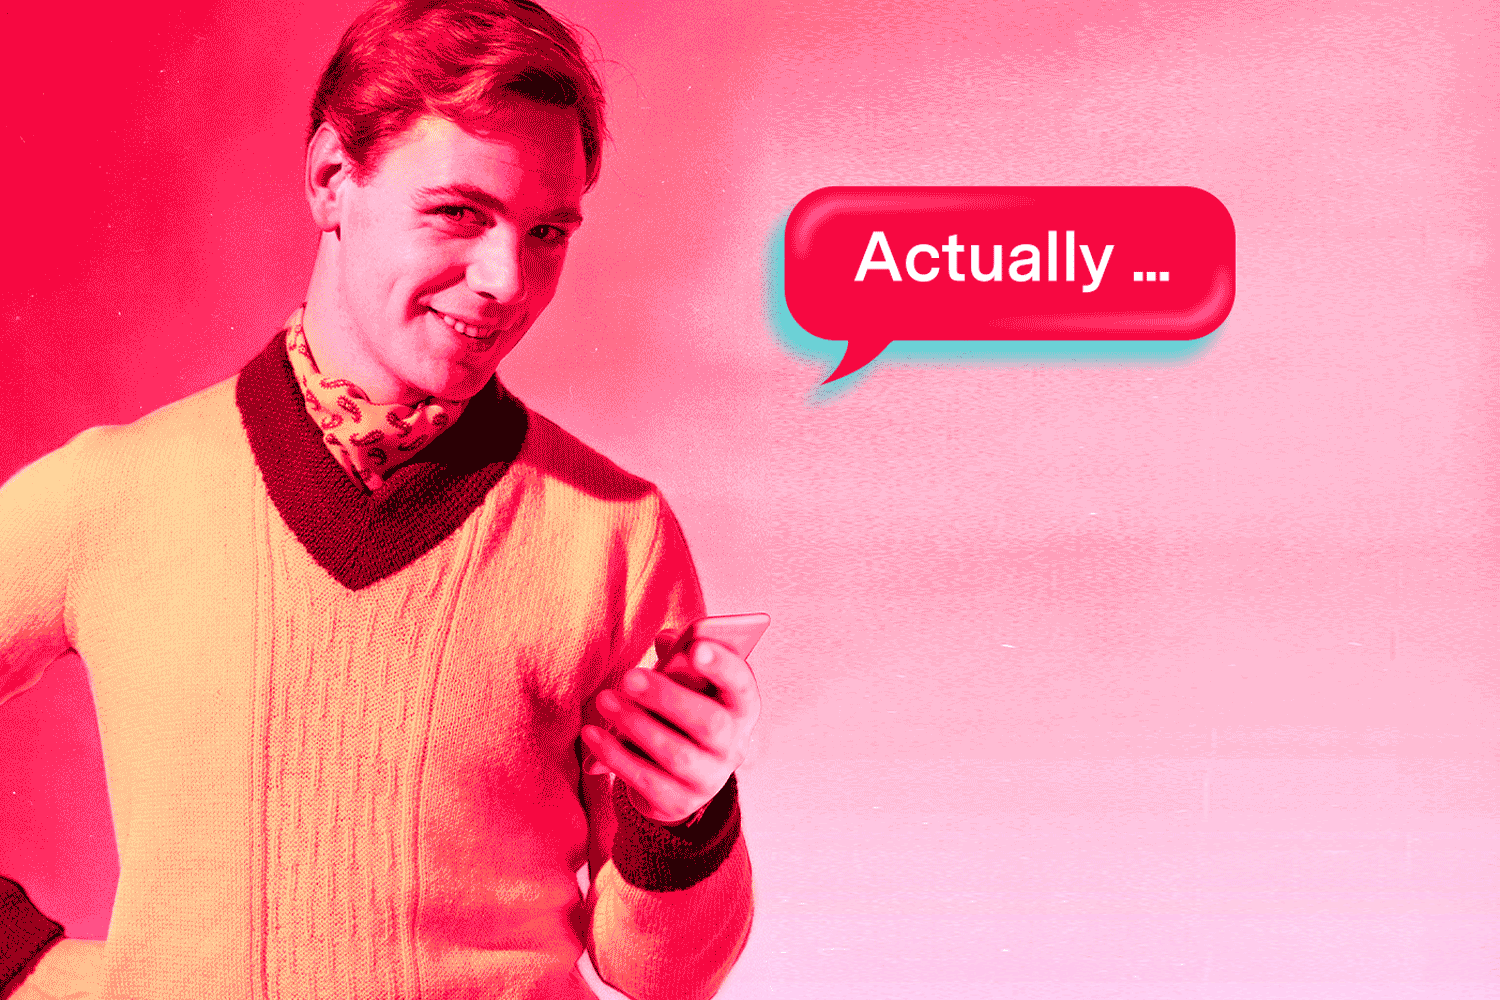 Youthsplaining: Are You a Reply Guy?